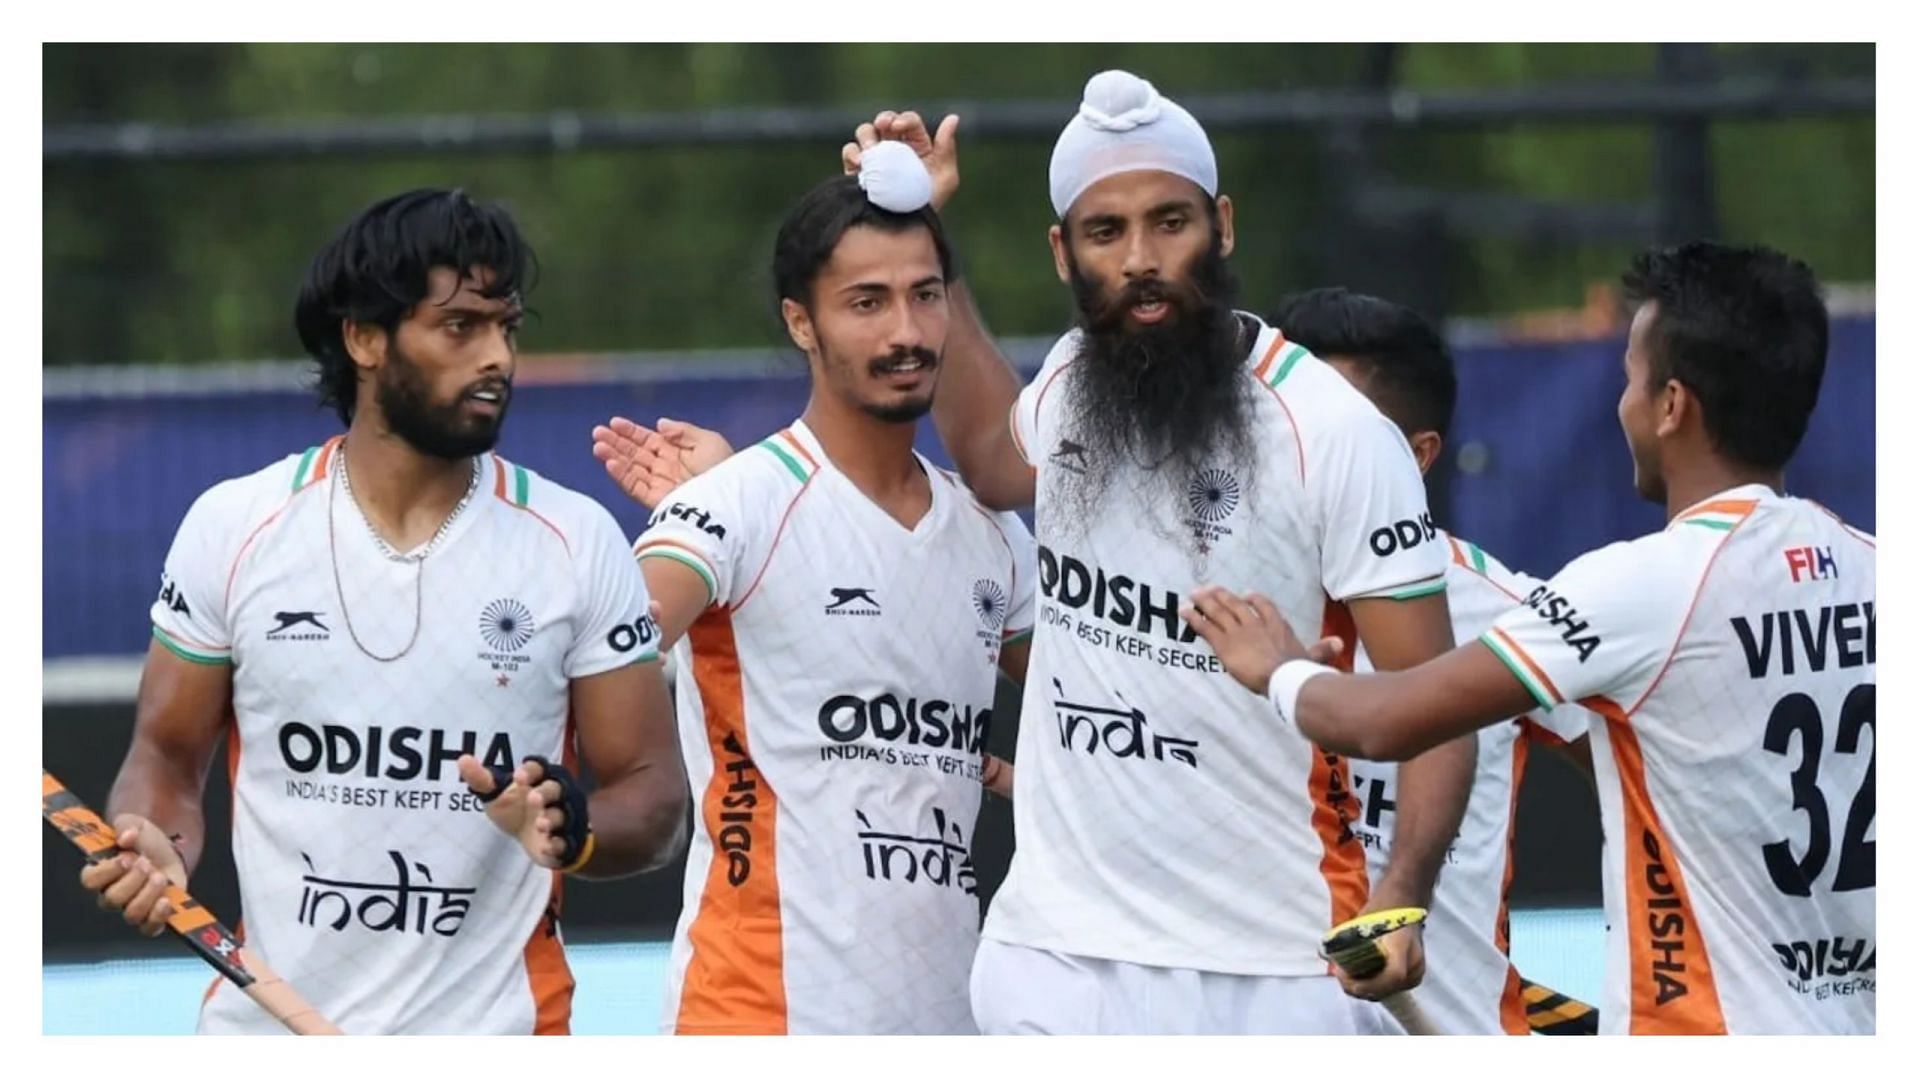 FIH Pro League 2021/22: Indian men lose to Netherlands (Pic Credit: Hockey India)